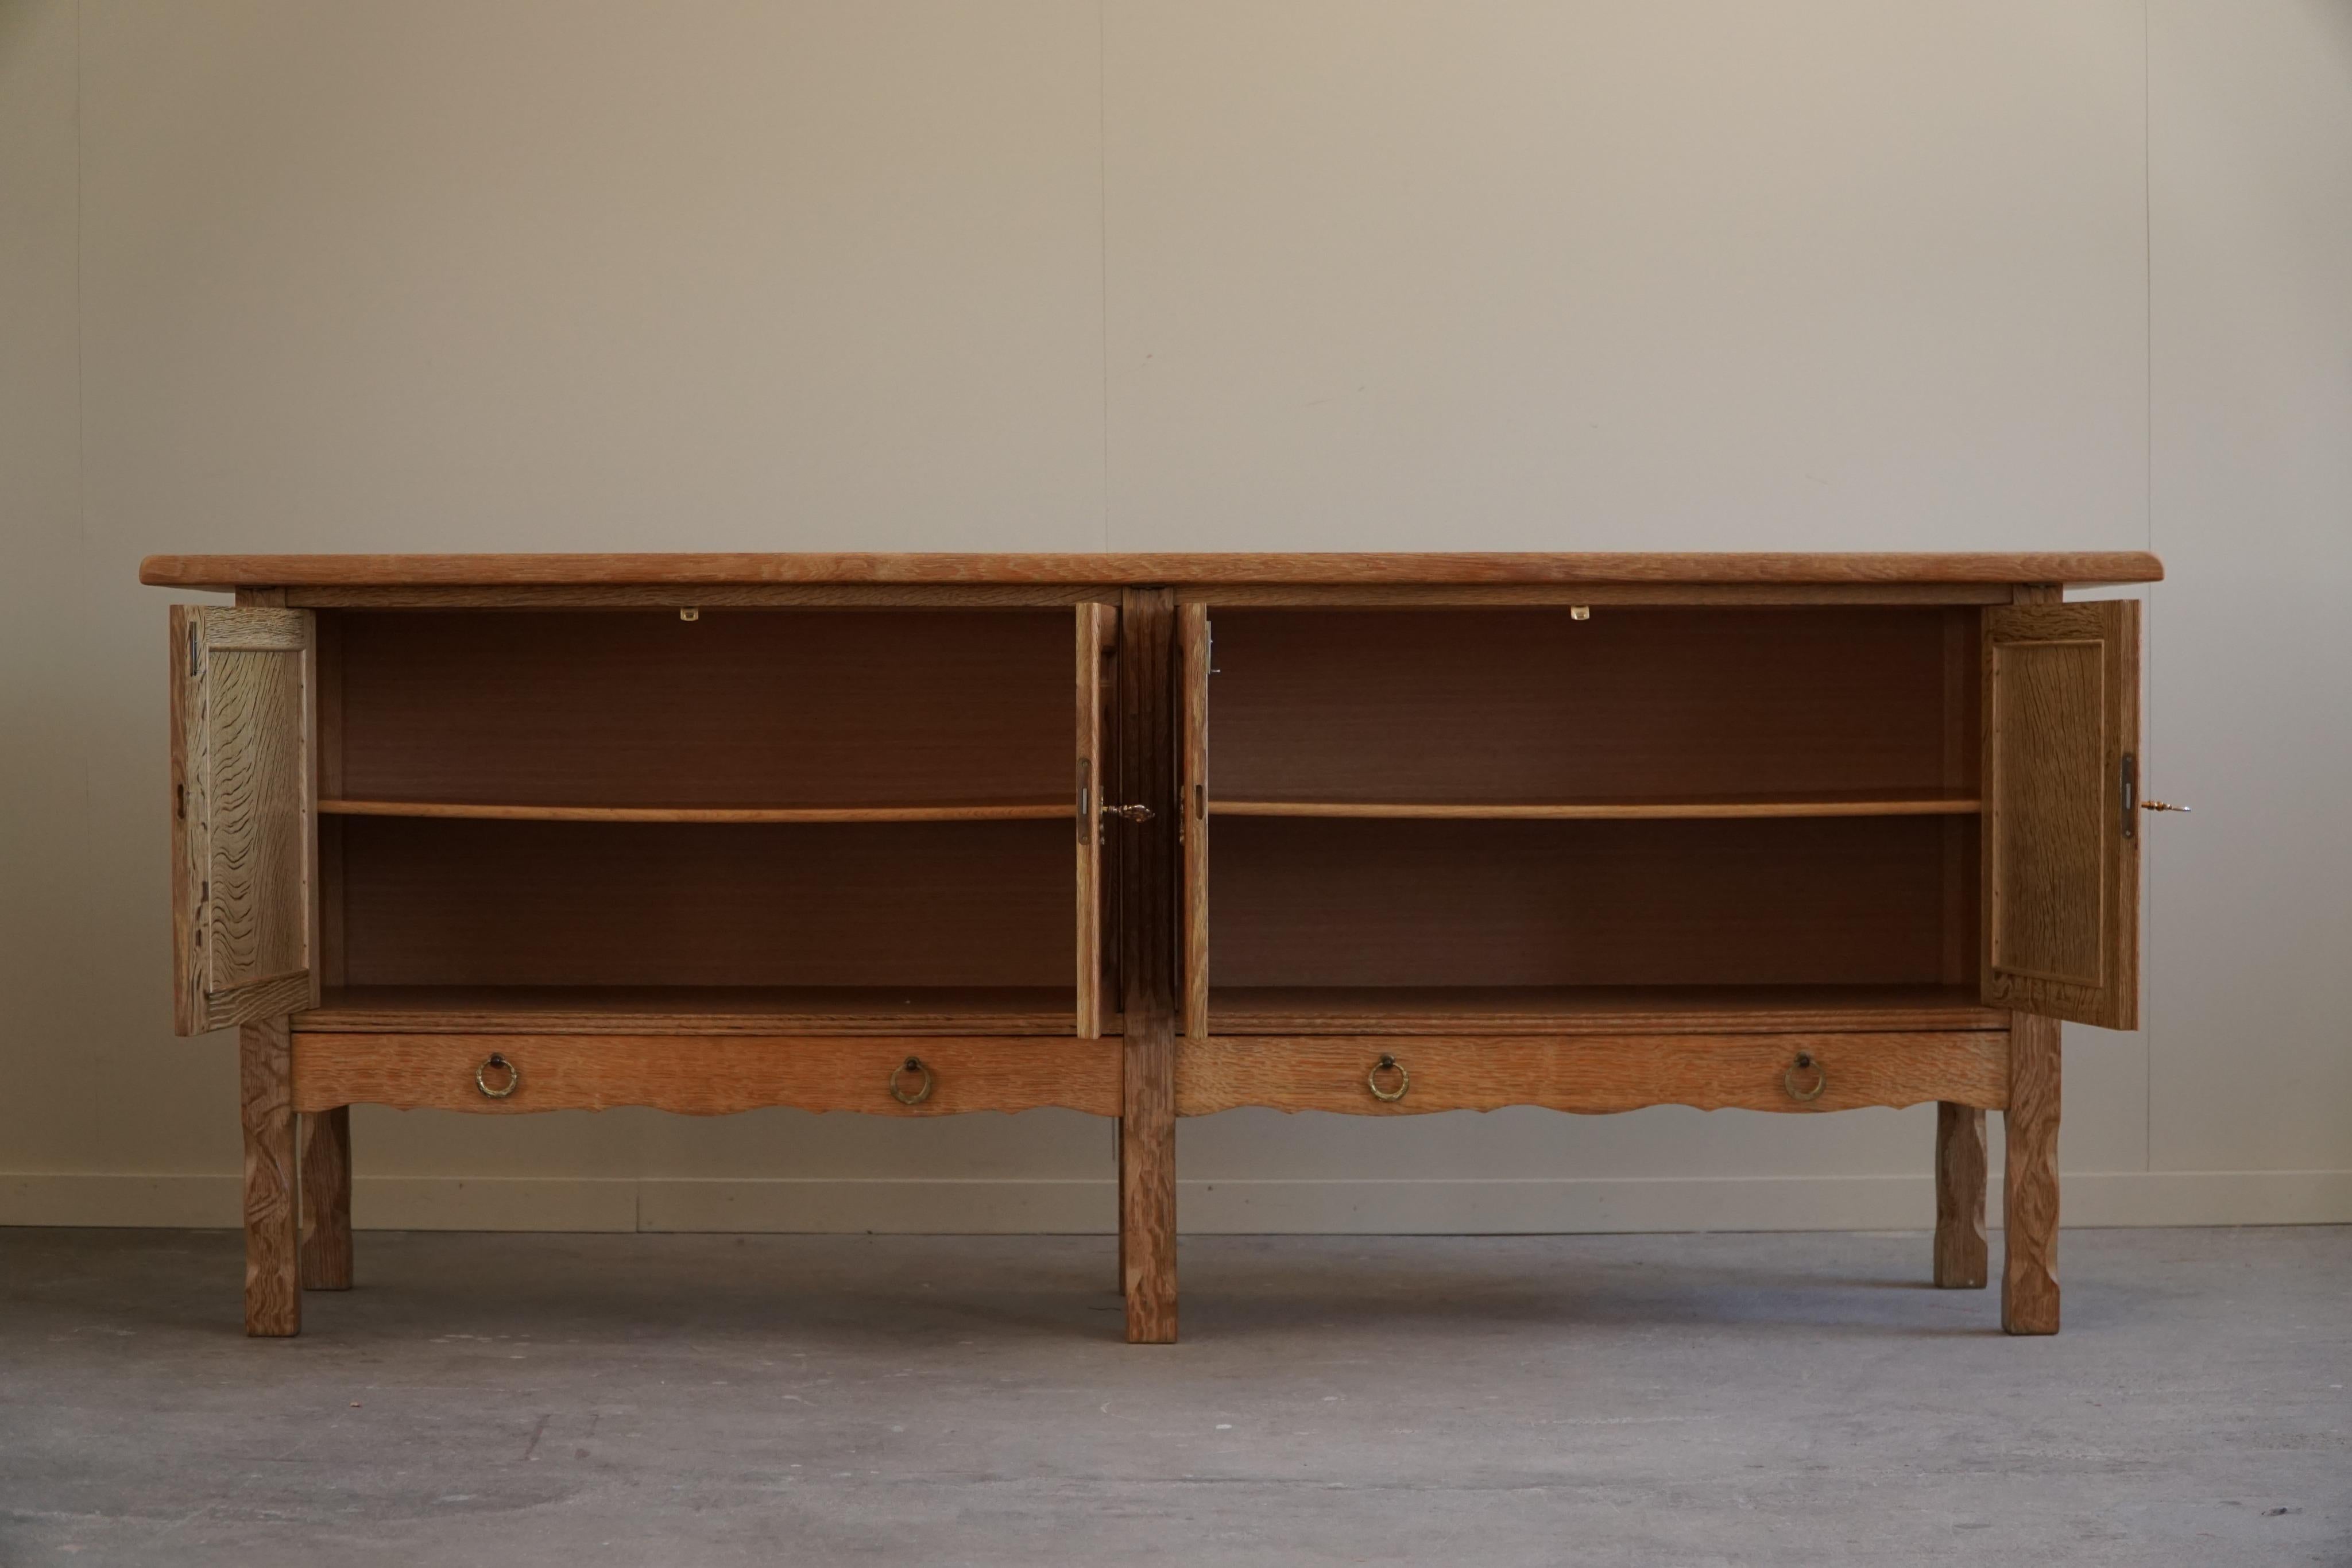 20th Century Cabinet in Oak, Midcentury, Made by a Danish Cabinetmaker, Brutalist, 1960s